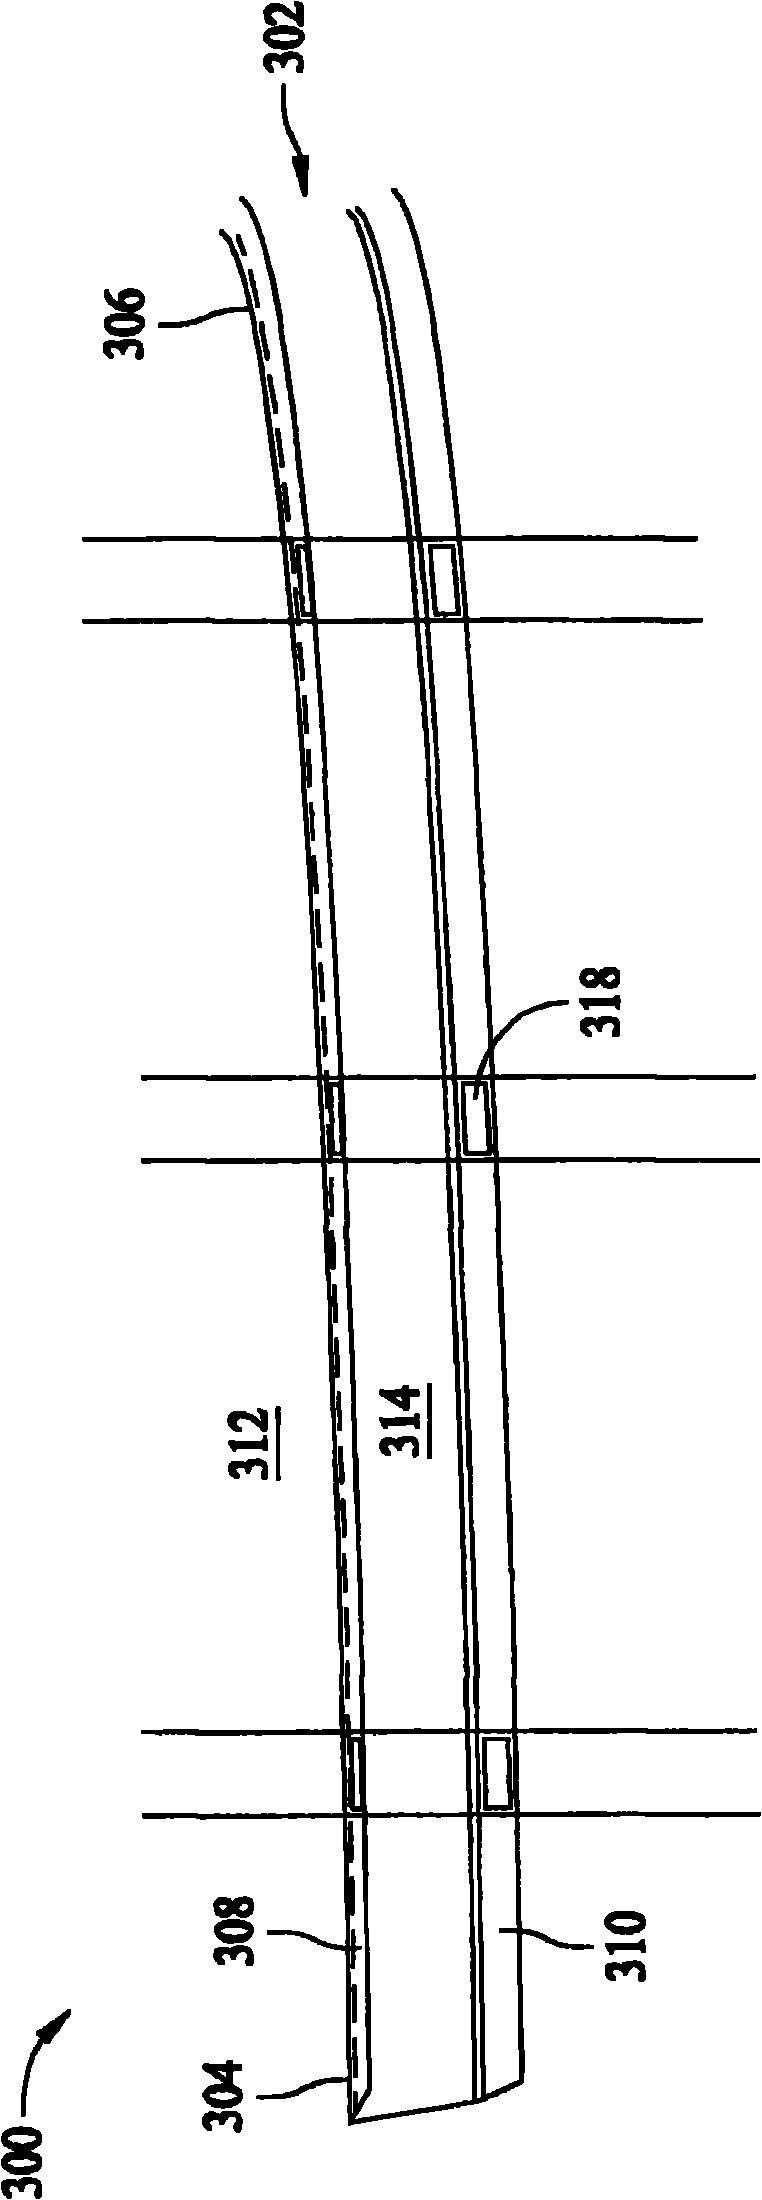 Methods and systems for manufacturing large components